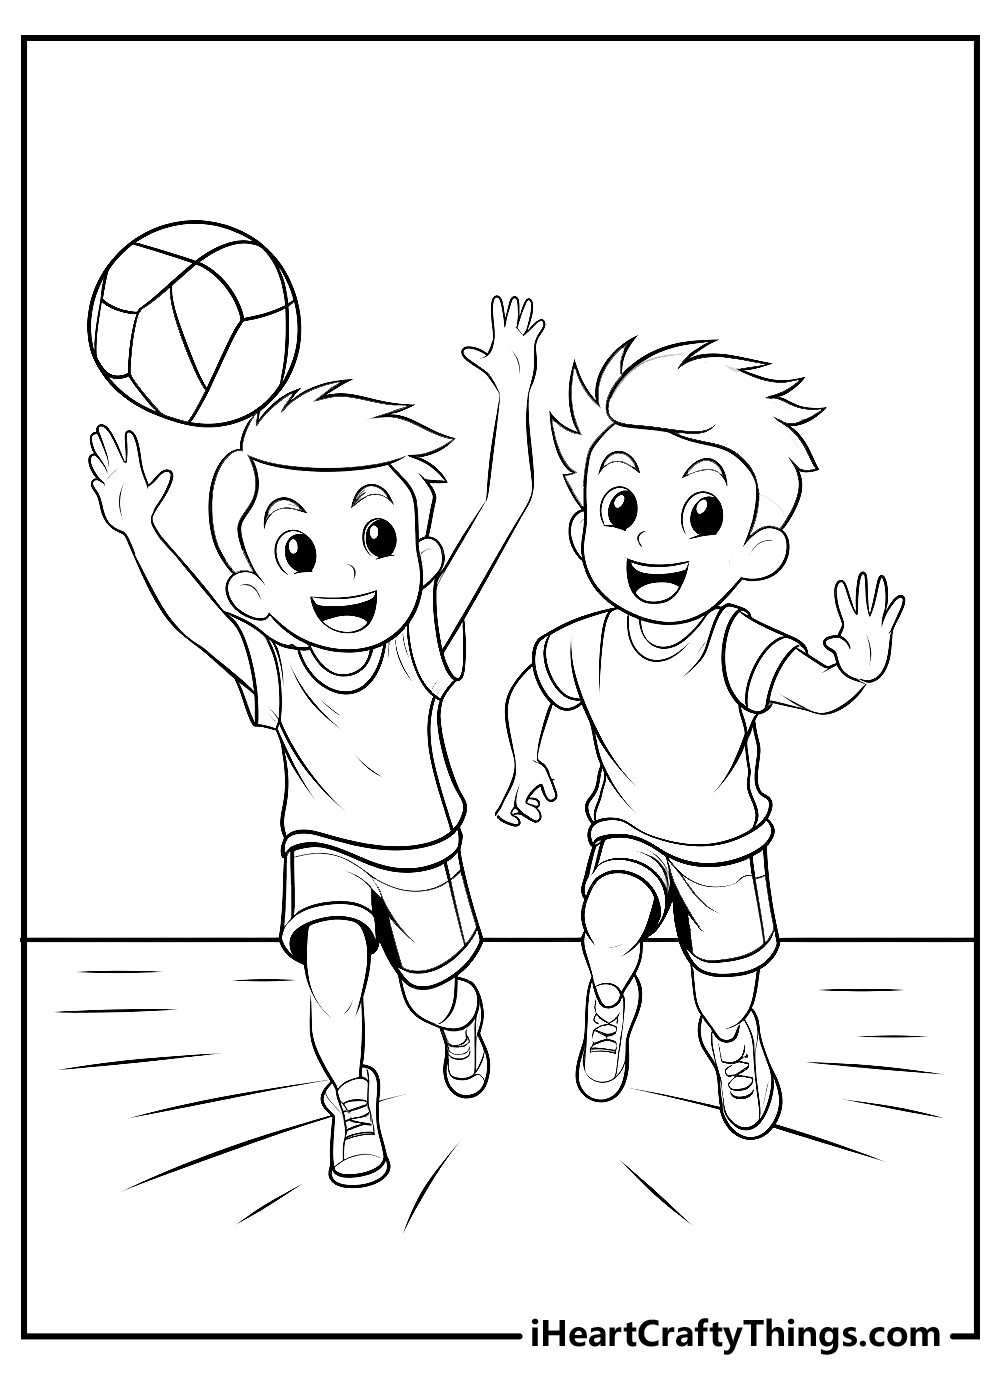 volleyball coloring pages for kids